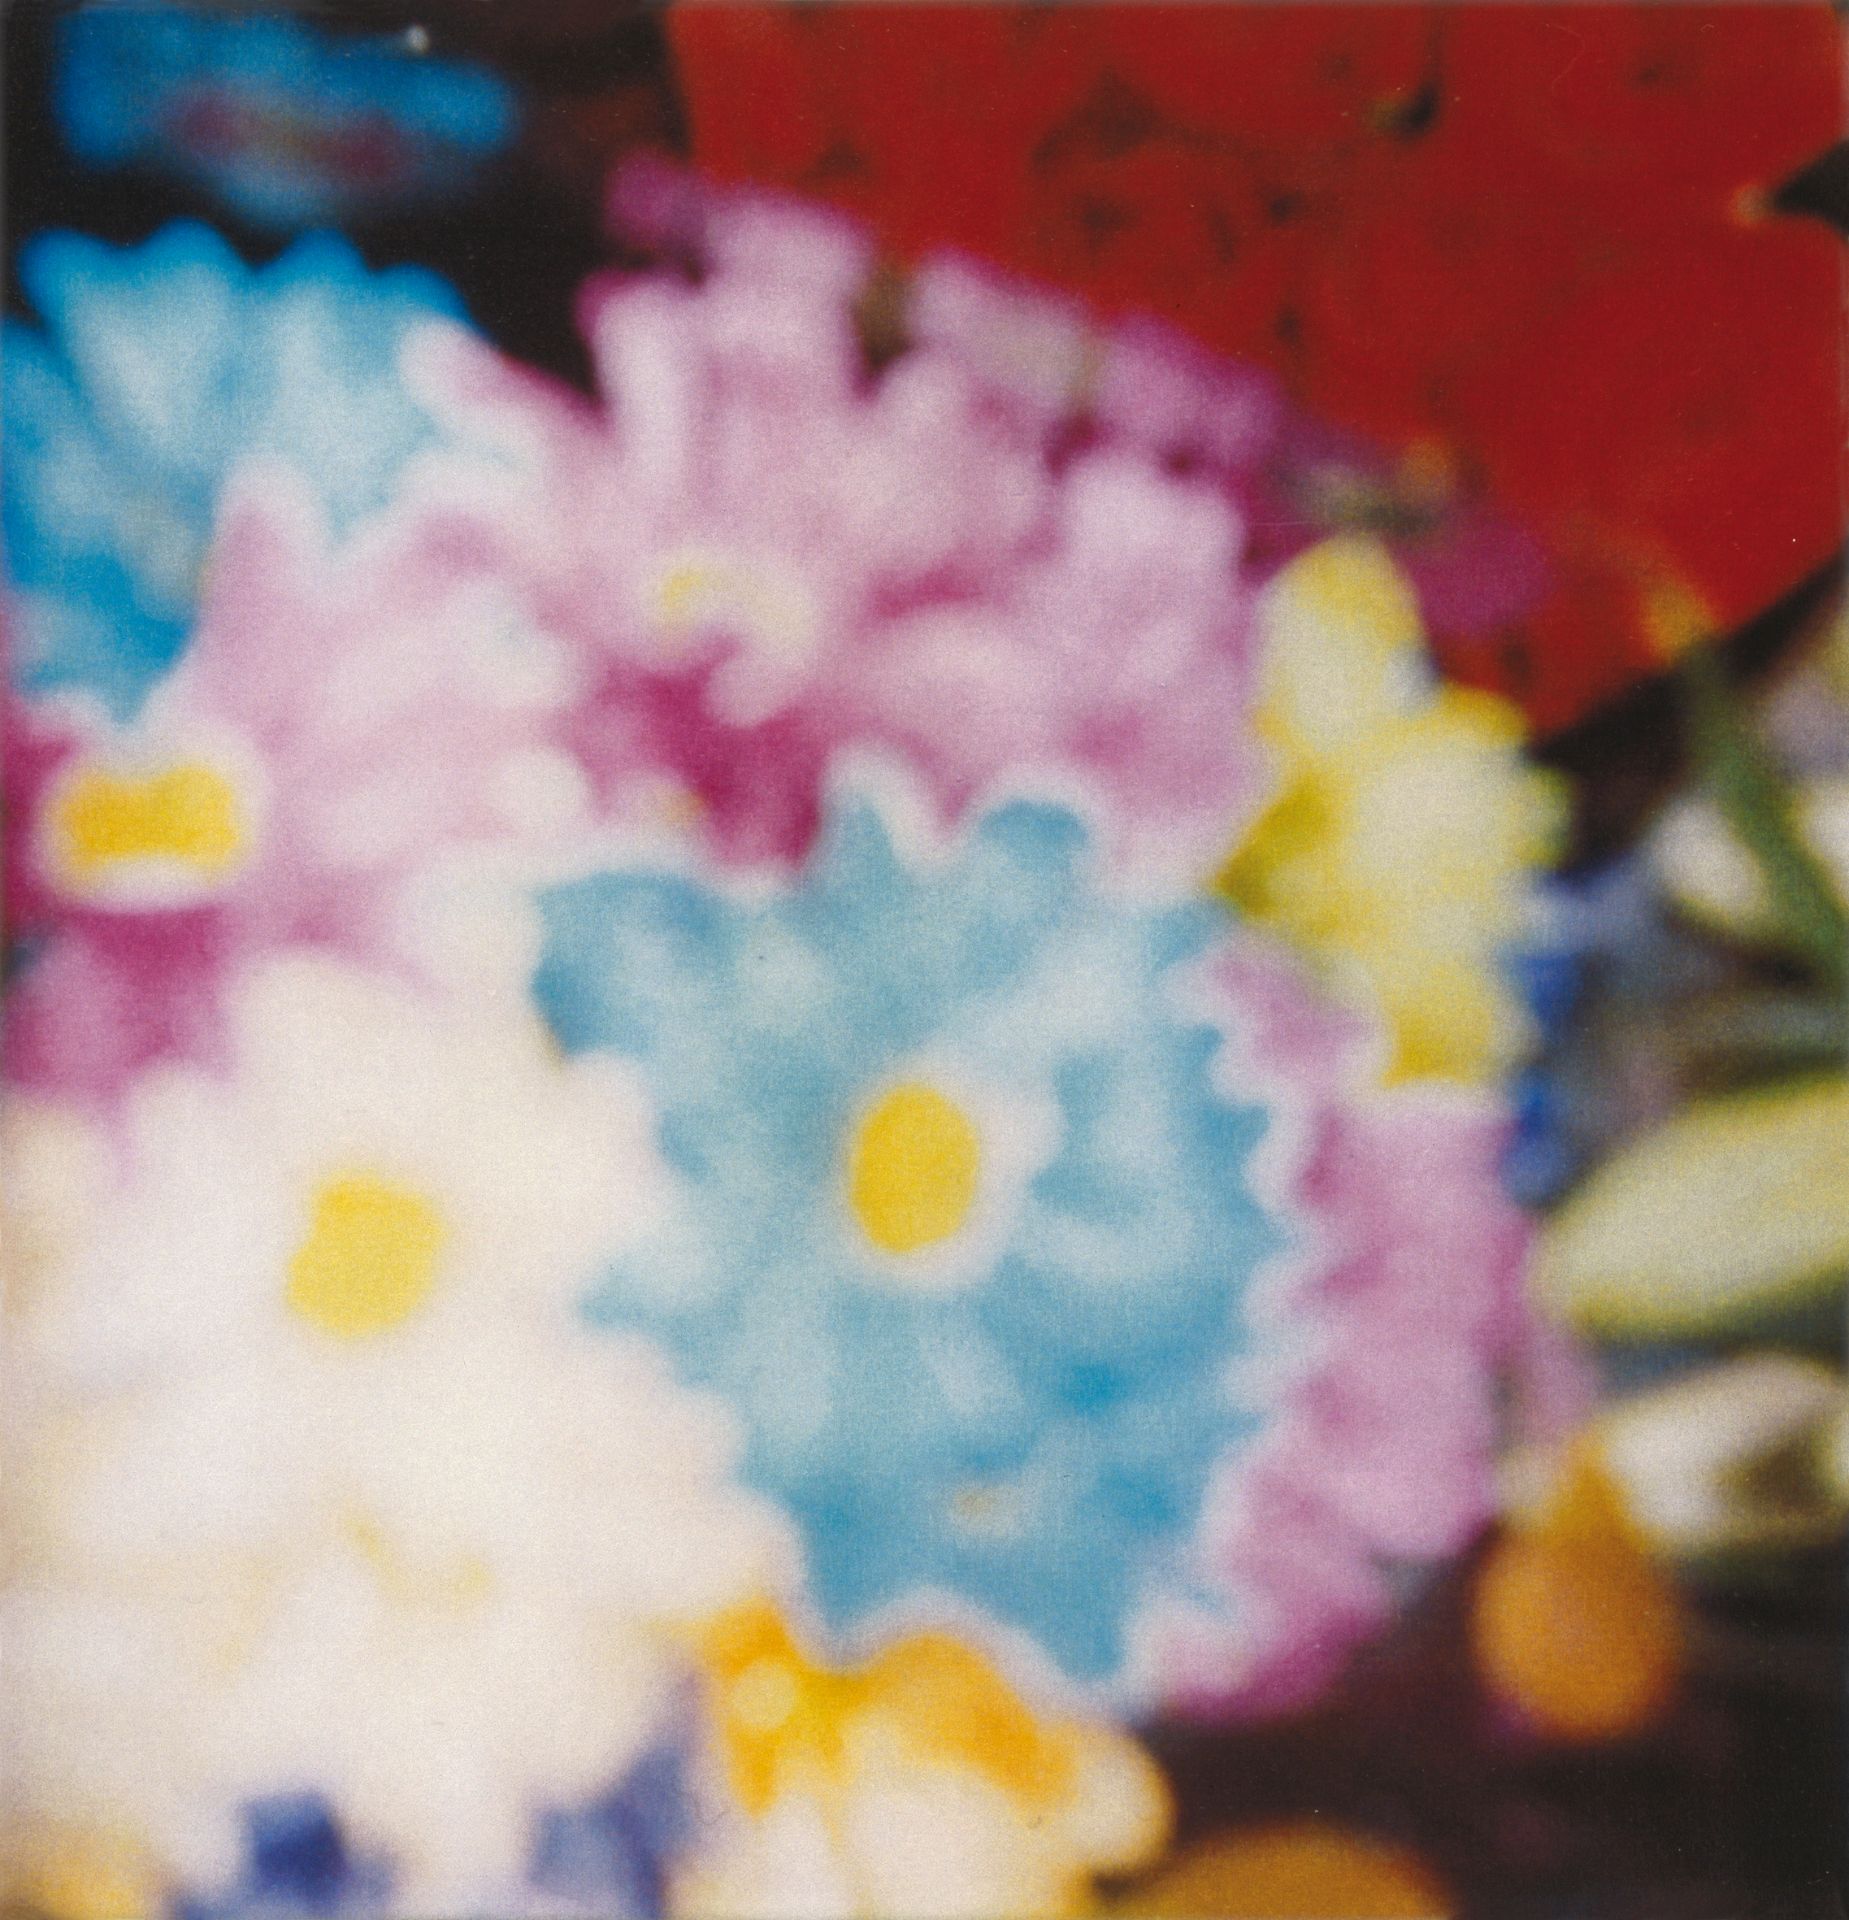 Cy Twombly – Wal Mart, Lexington 2007 - Image 3 of 5